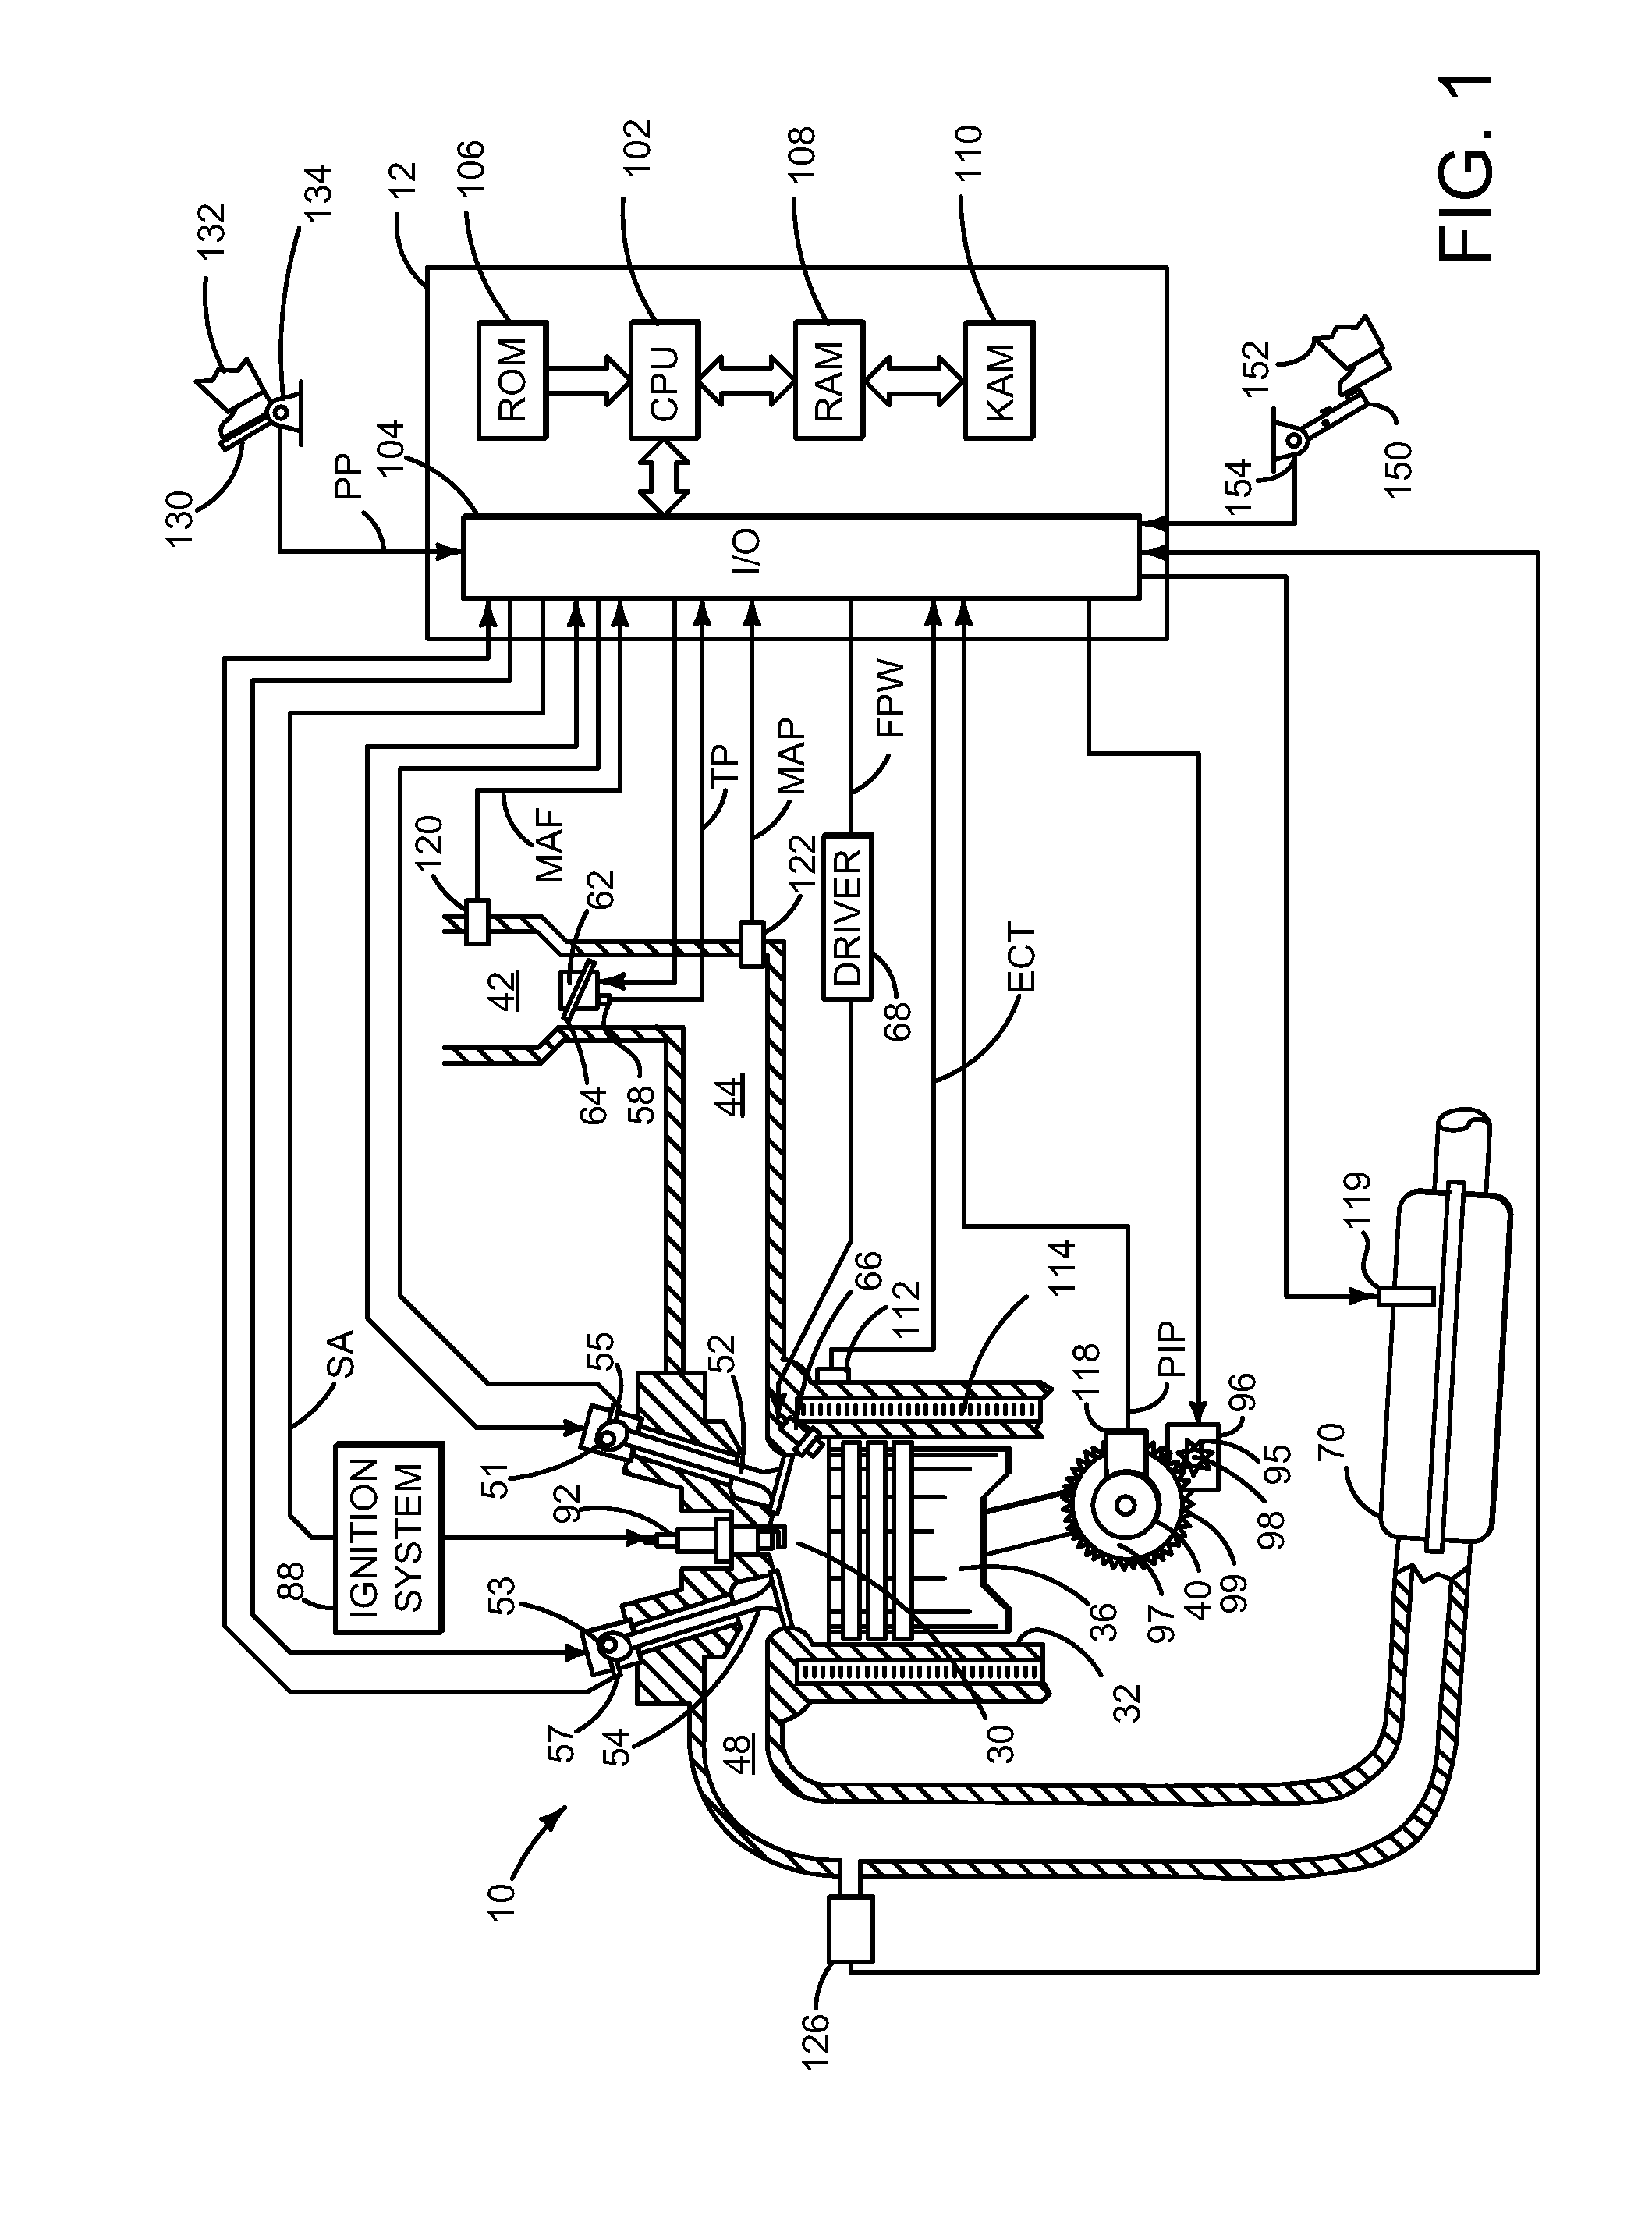 Methods and systems for driveline mode transitions